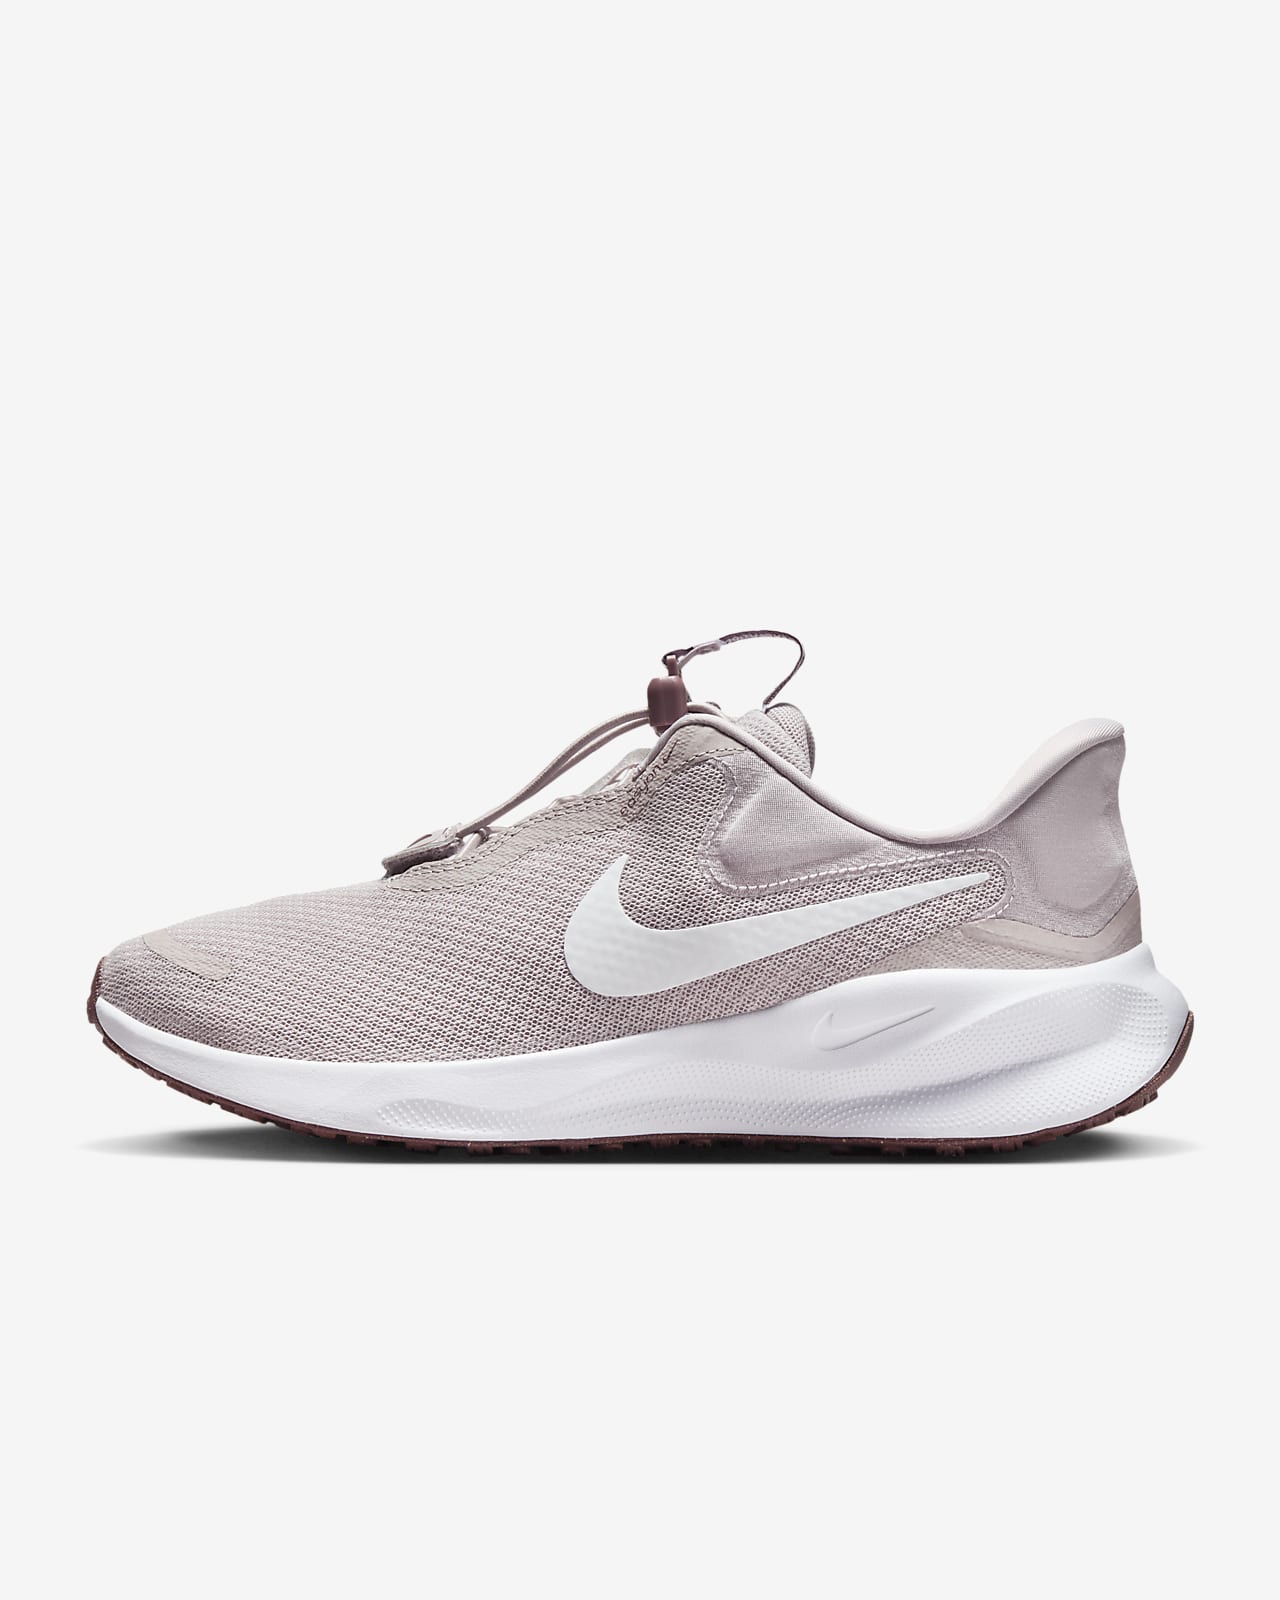 Discover more than 194 nike flex womens sneakers latest